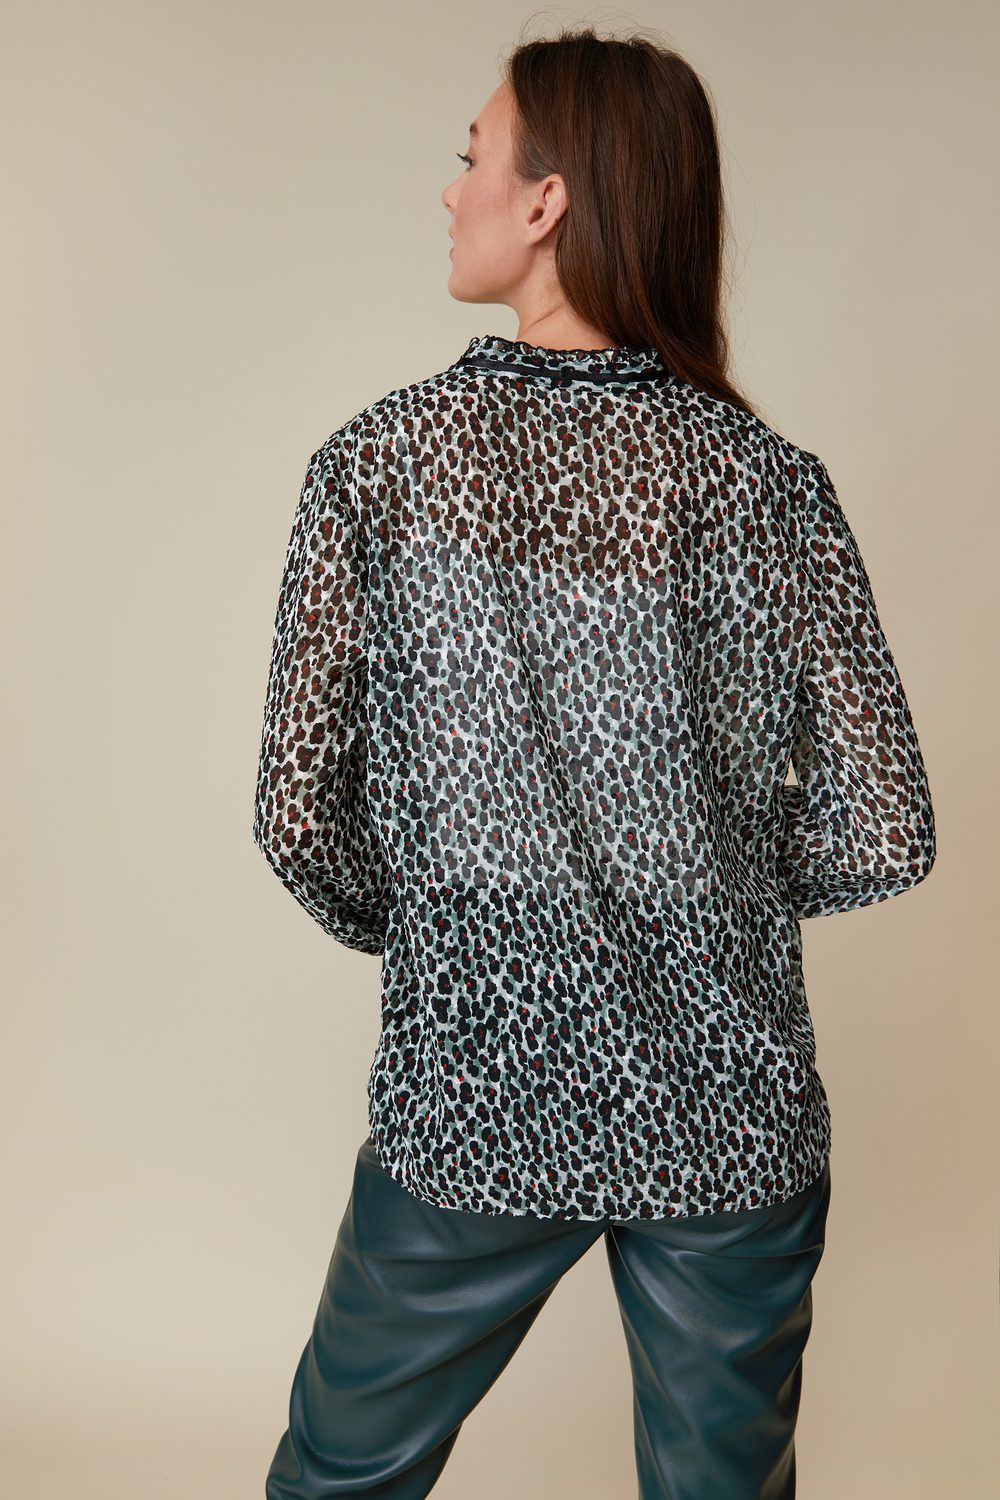 Leopard Print Blouse With Puffy Sleeves